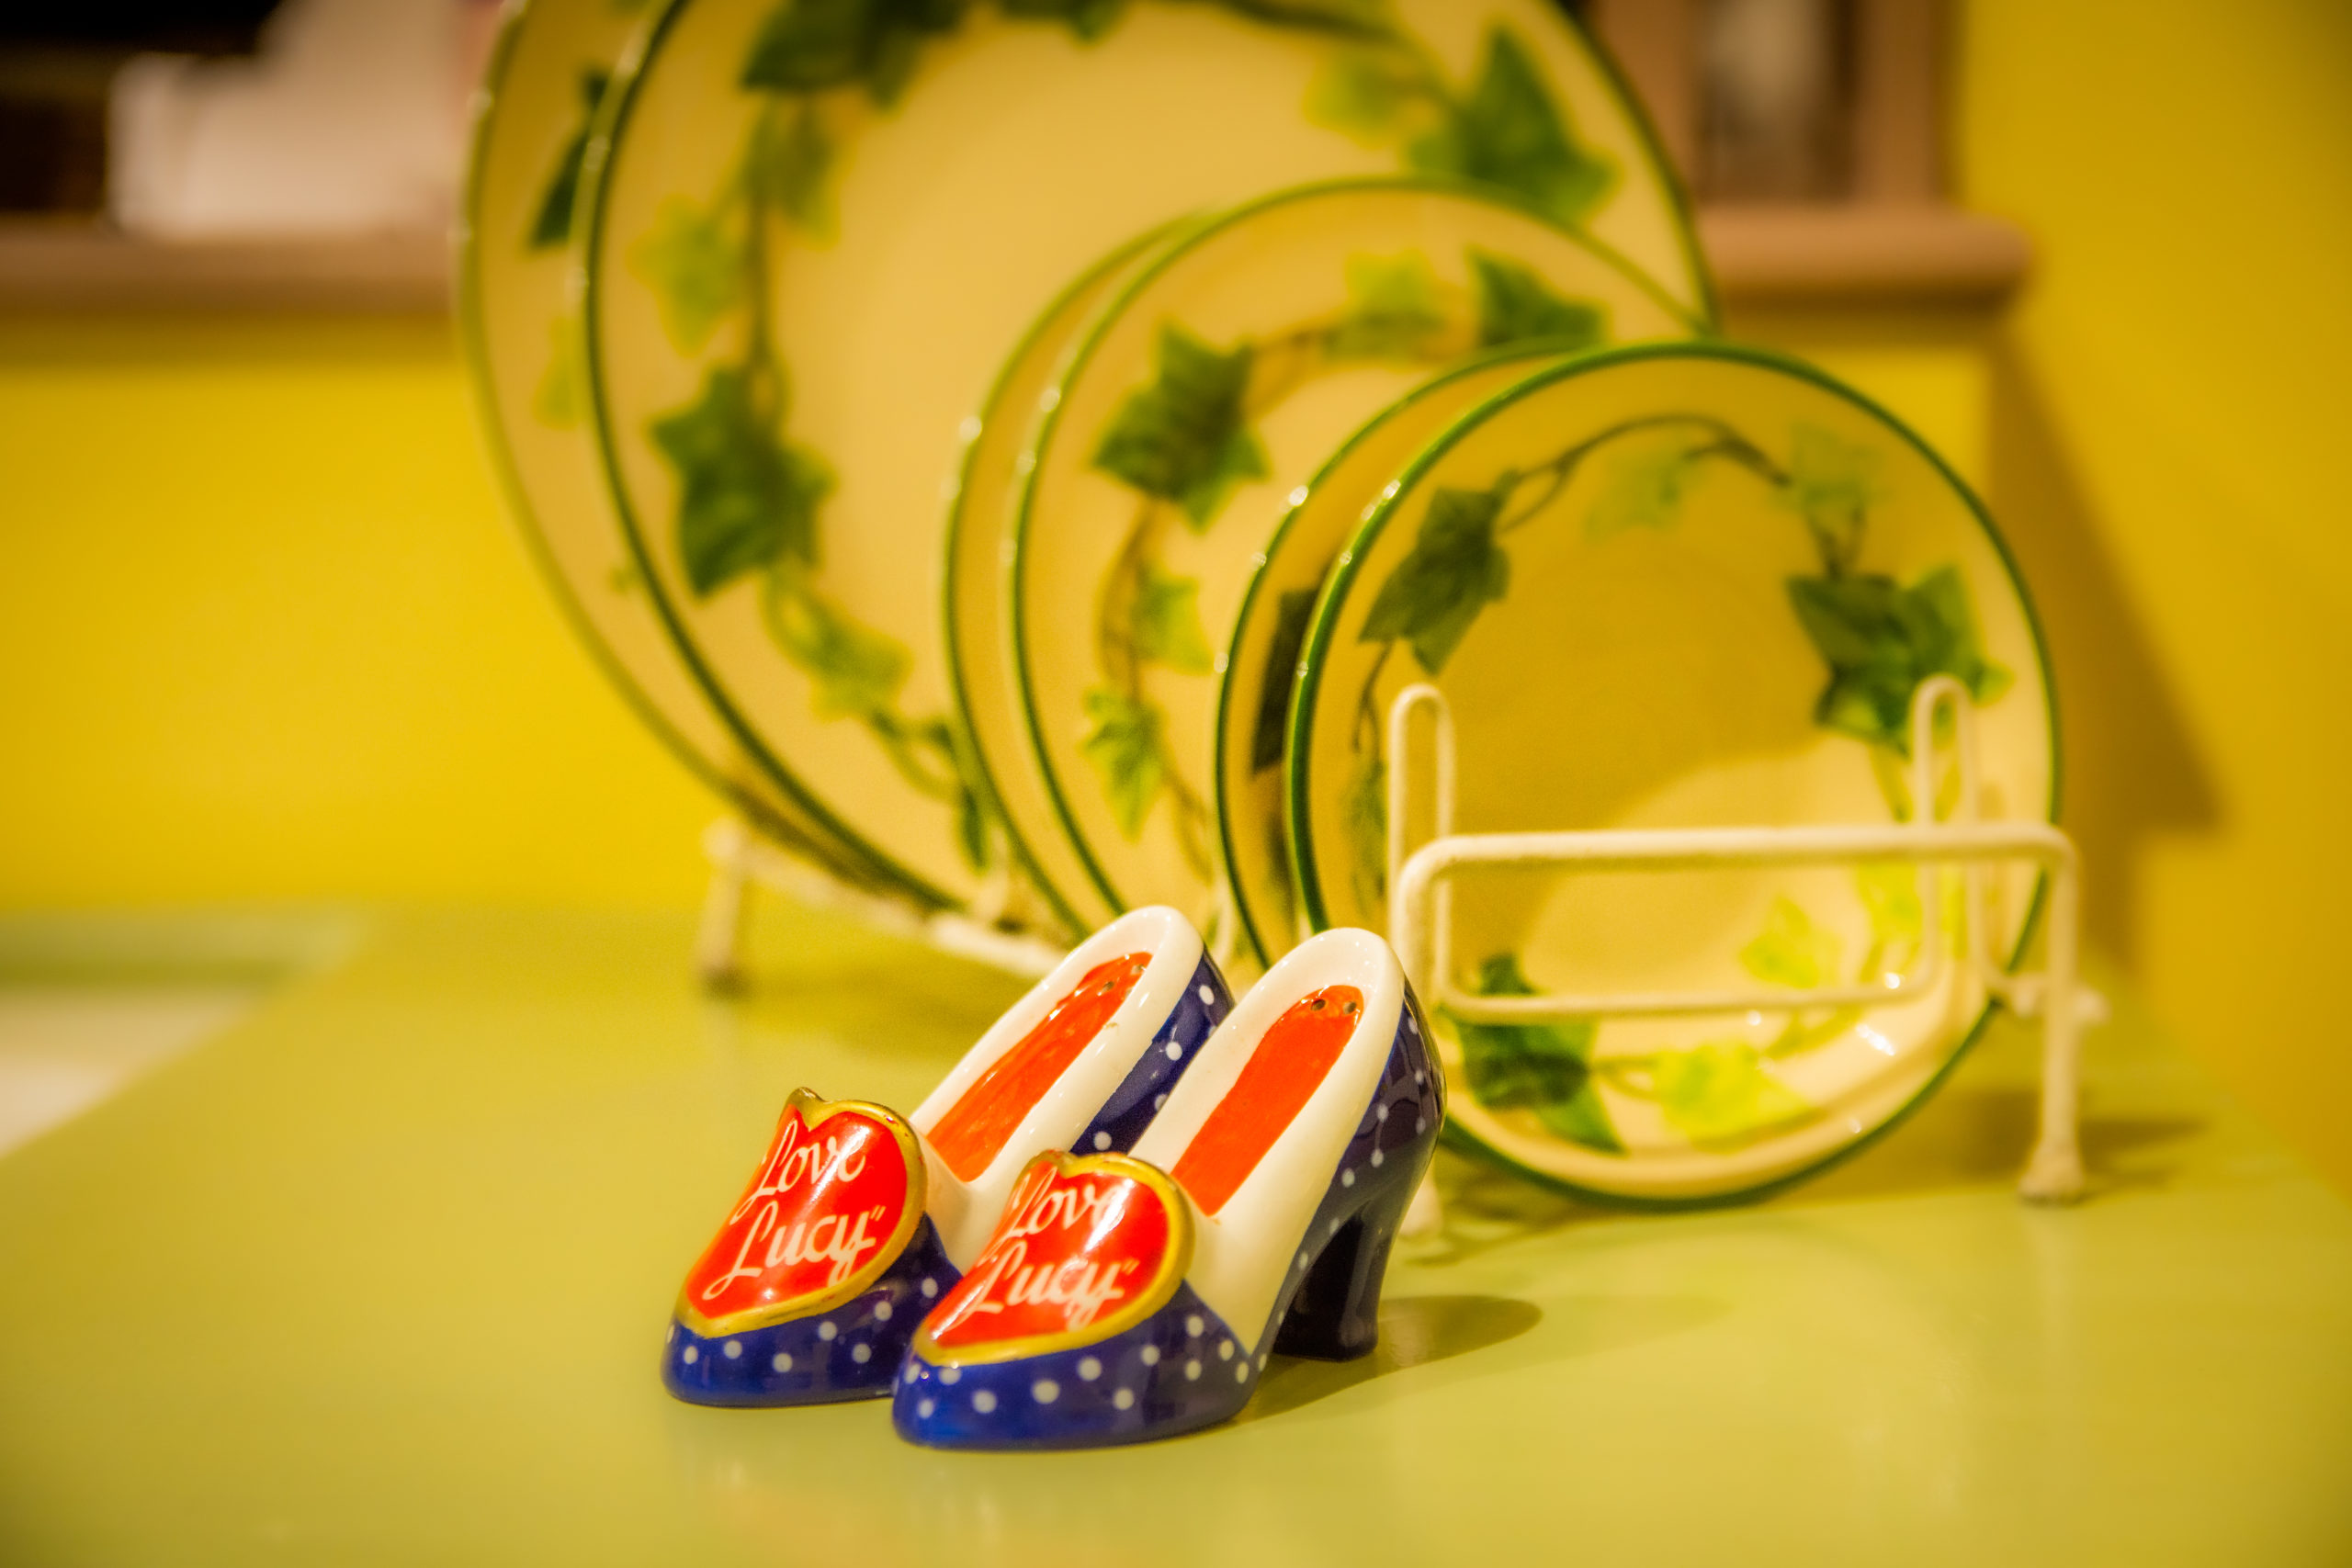 I I Love Lucy shoe salt and pepper shakers displayed infront of kitchen dining set